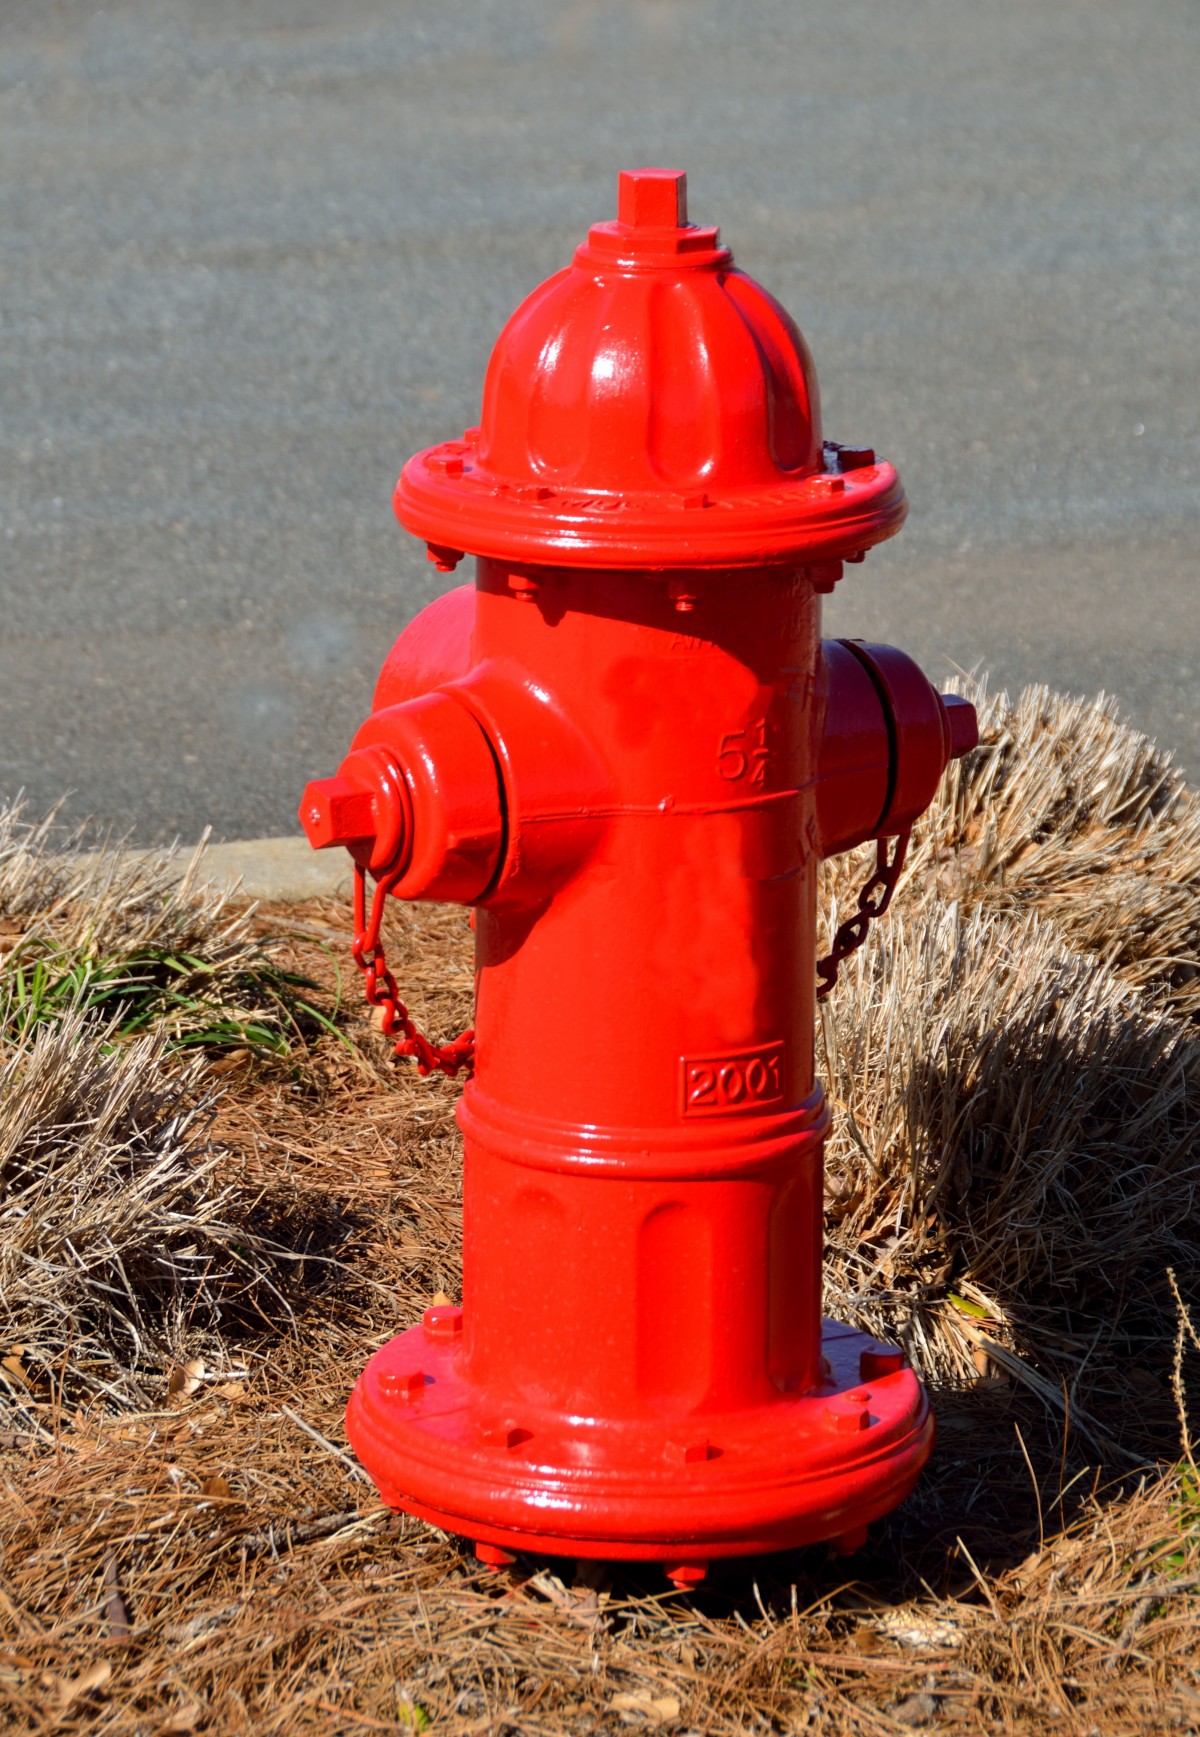 fire_hydrant_red_hydrant_safety_emergency_plug_protection_rescue-1276916